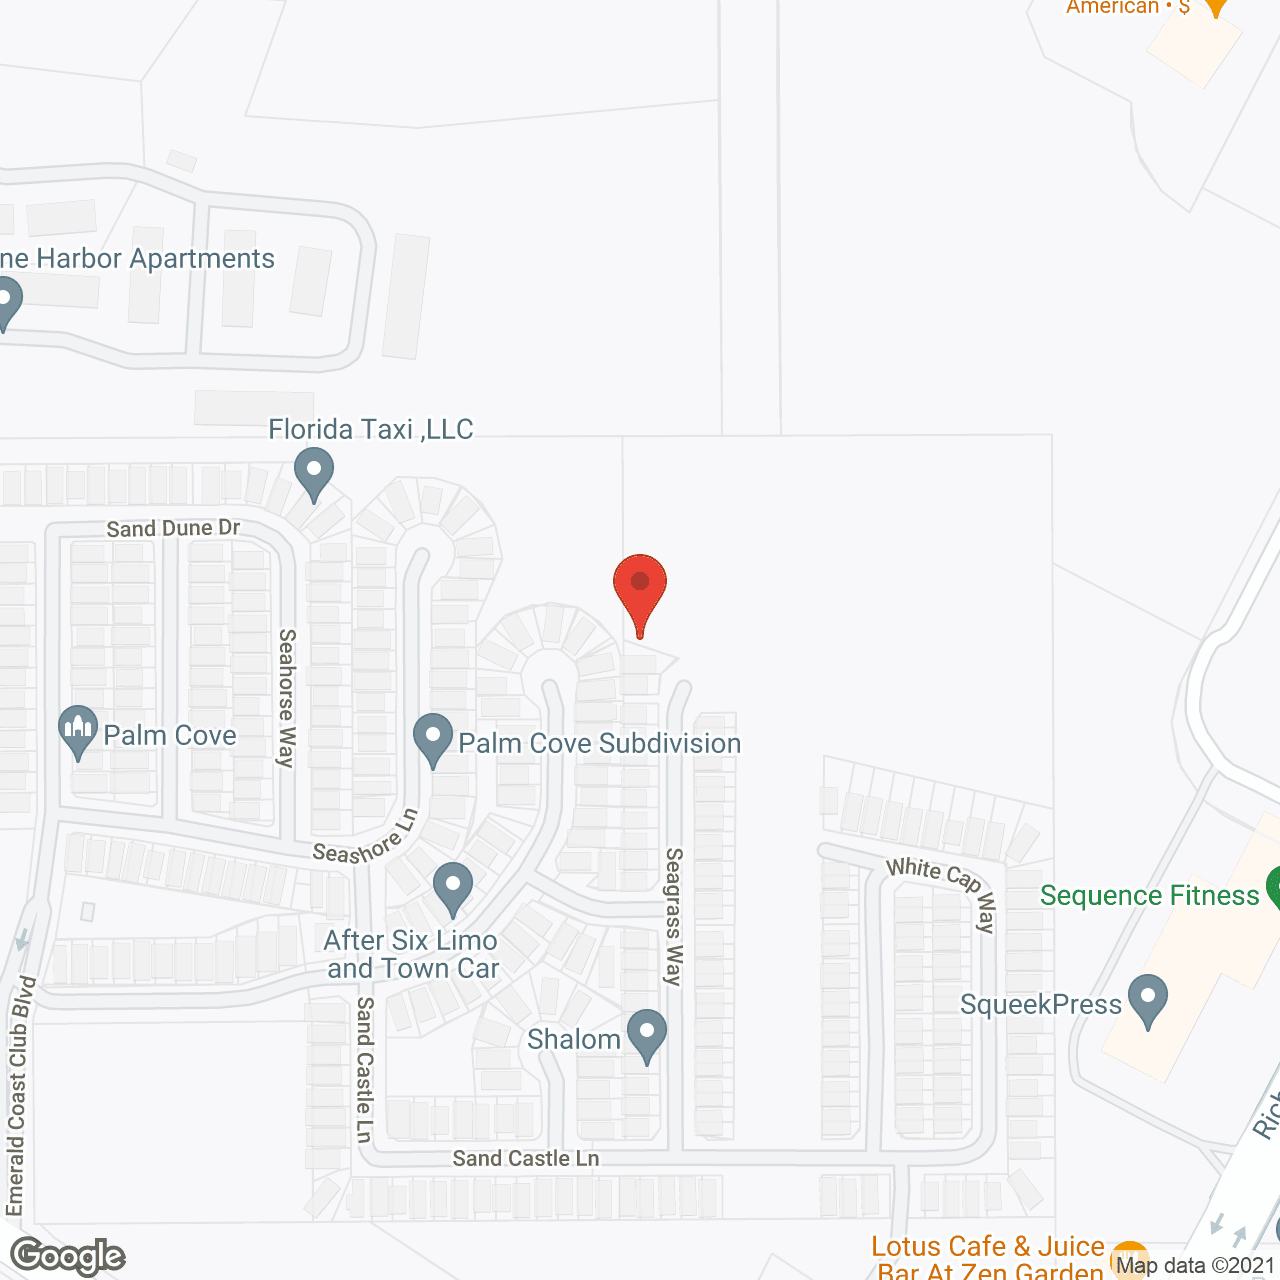 The Landing in google map